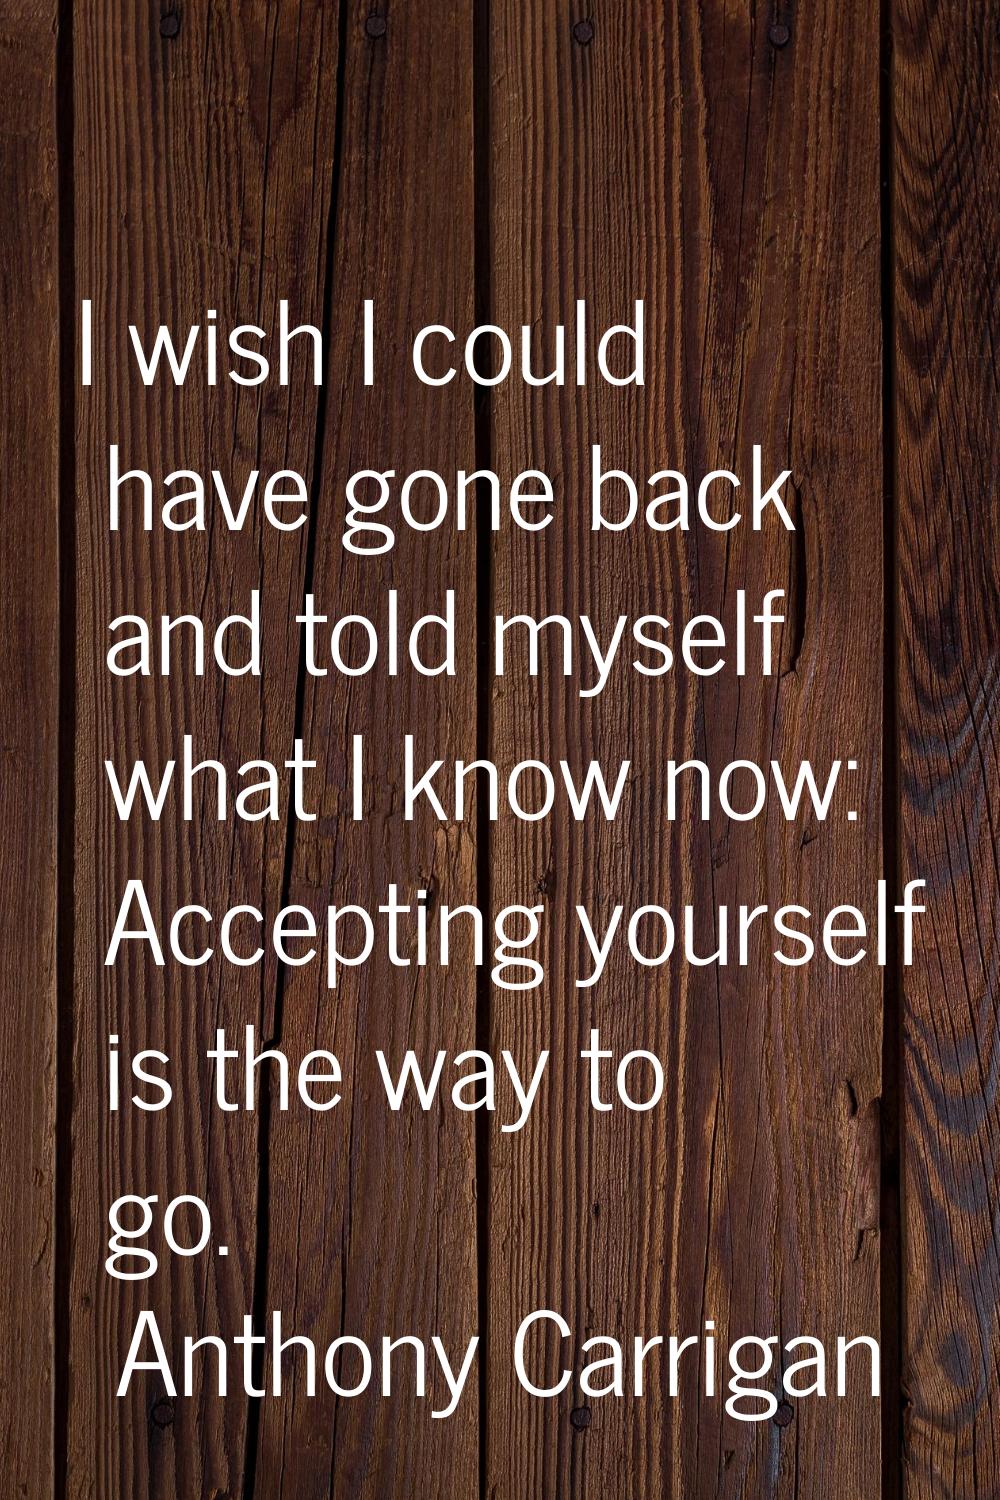 I wish I could have gone back and told myself what I know now: Accepting yourself is the way to go.